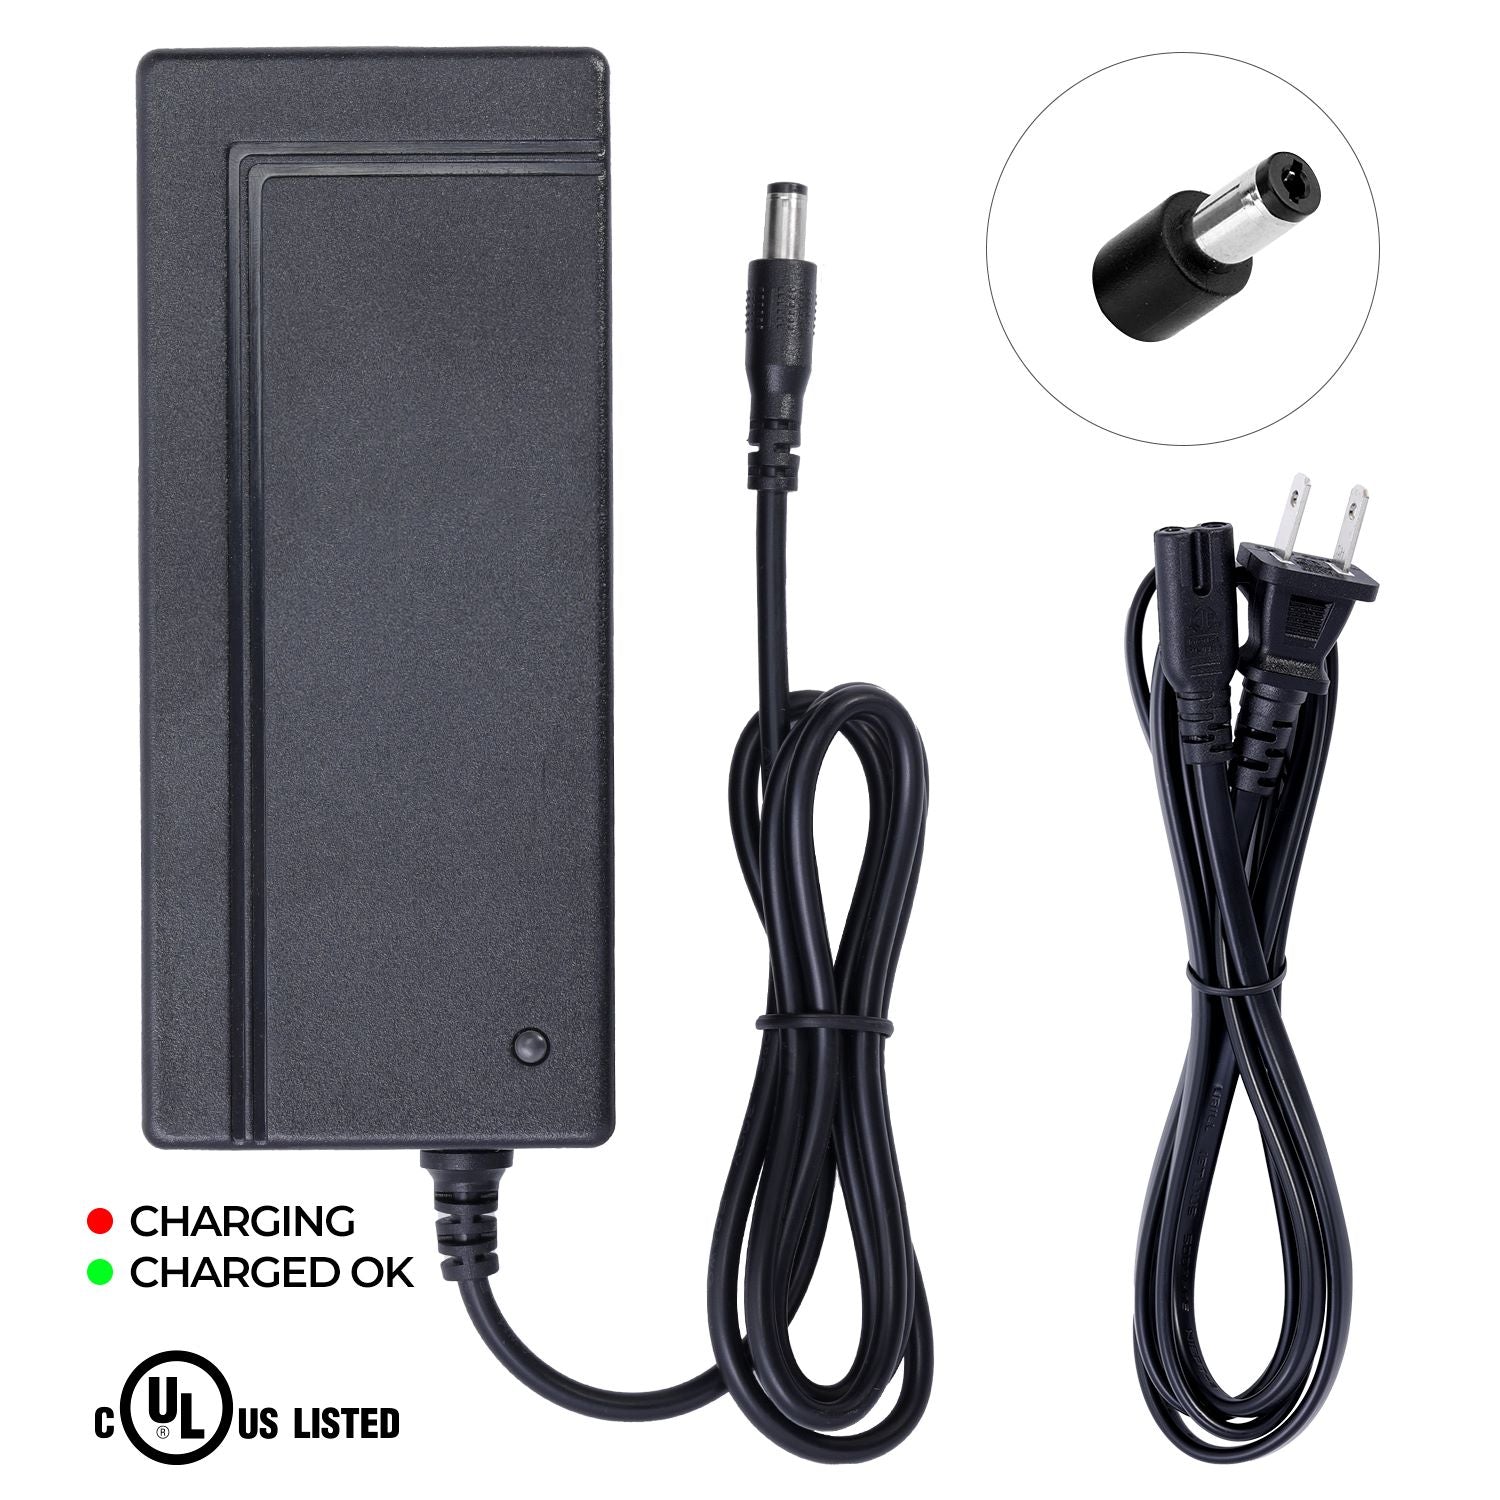 UL Listed Charger for JupiterBike Discovery X7 eBike (NOT for Discovery Released in 2019)